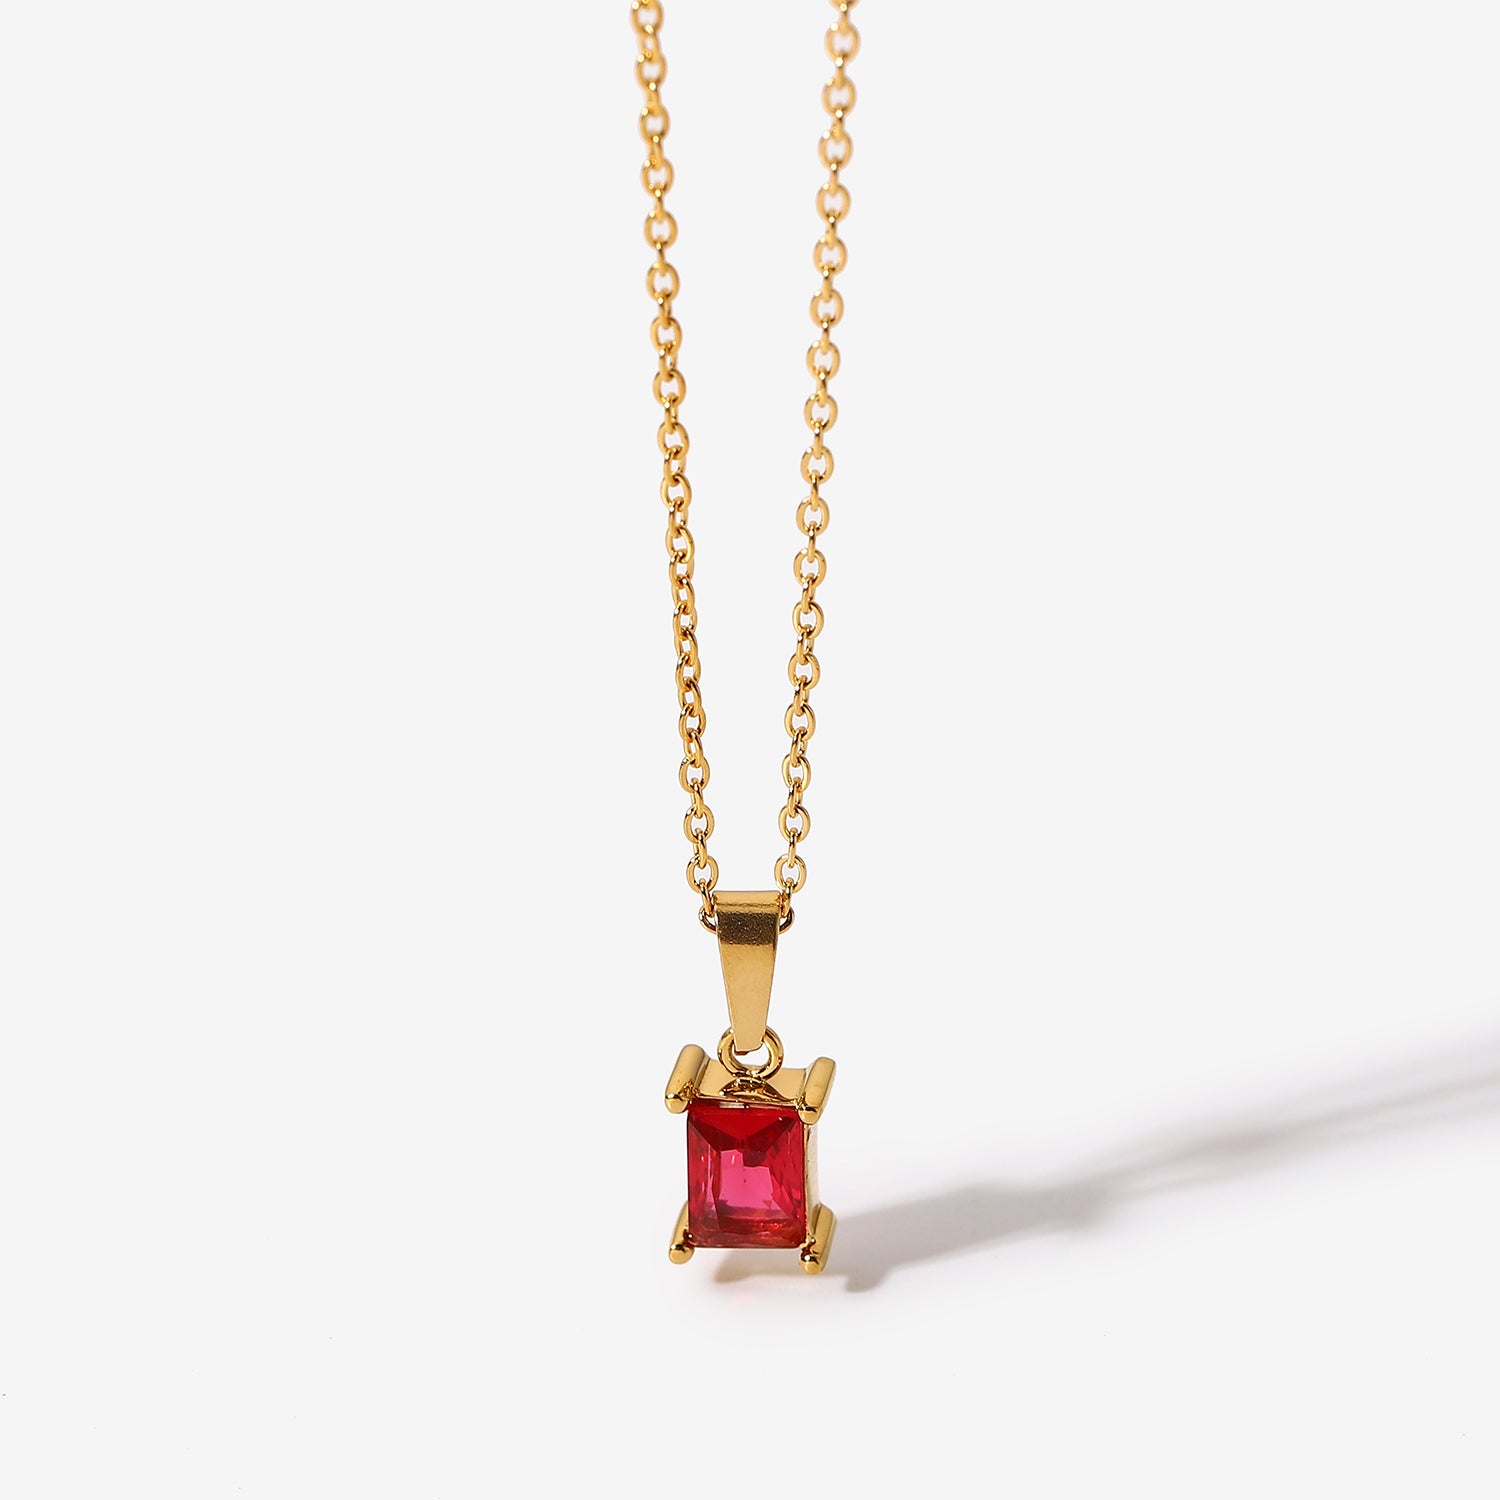 Gold Necklace with a Square Red Cubic Zirconia